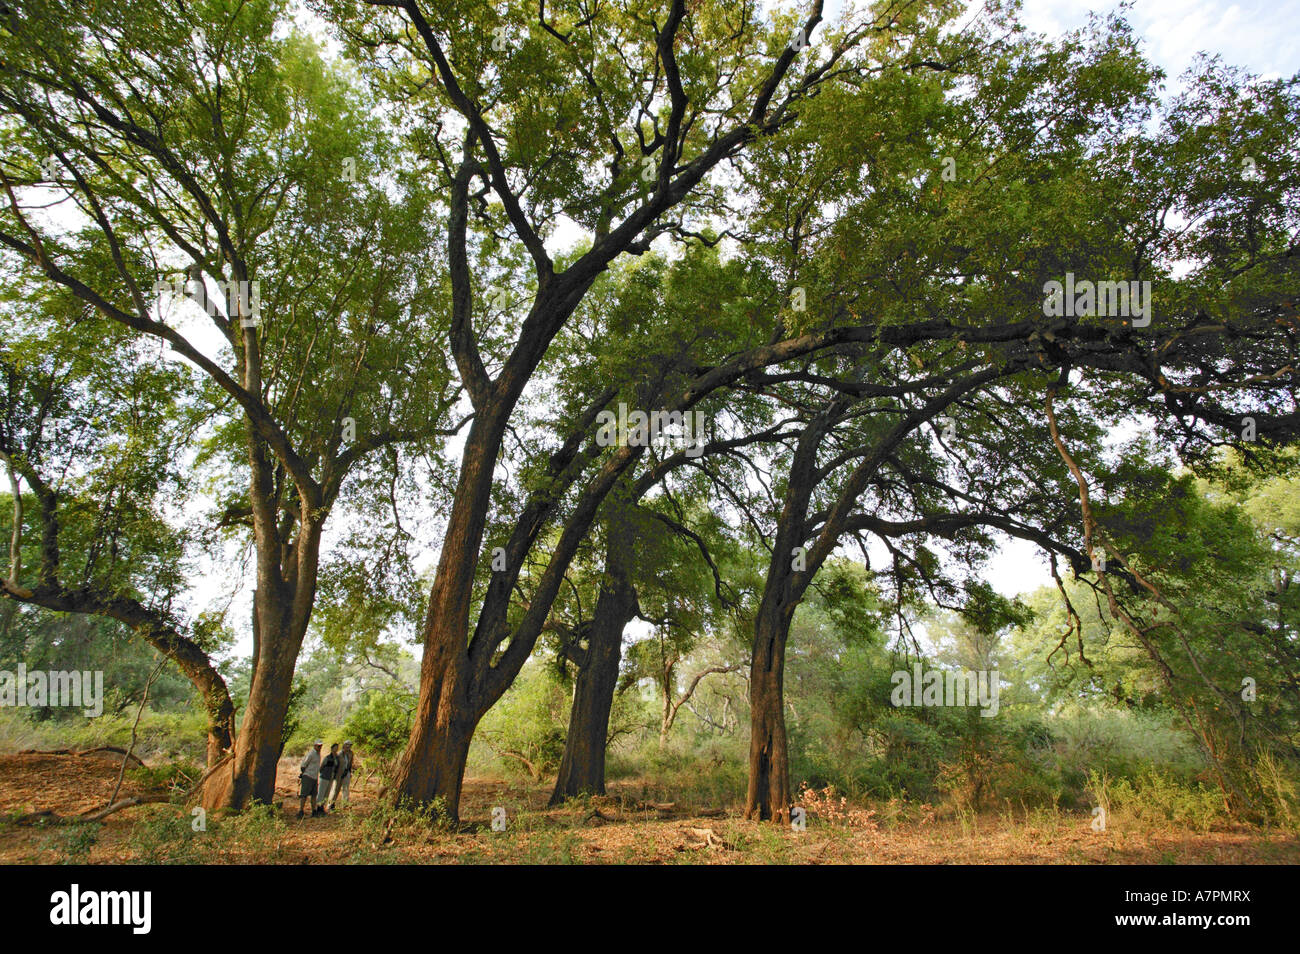 Hikers on a nature walk dwarfed by a stand of Nyala trees Xanthocercis zambesiaca on the banks of the Luvuvhu river Stock Photo